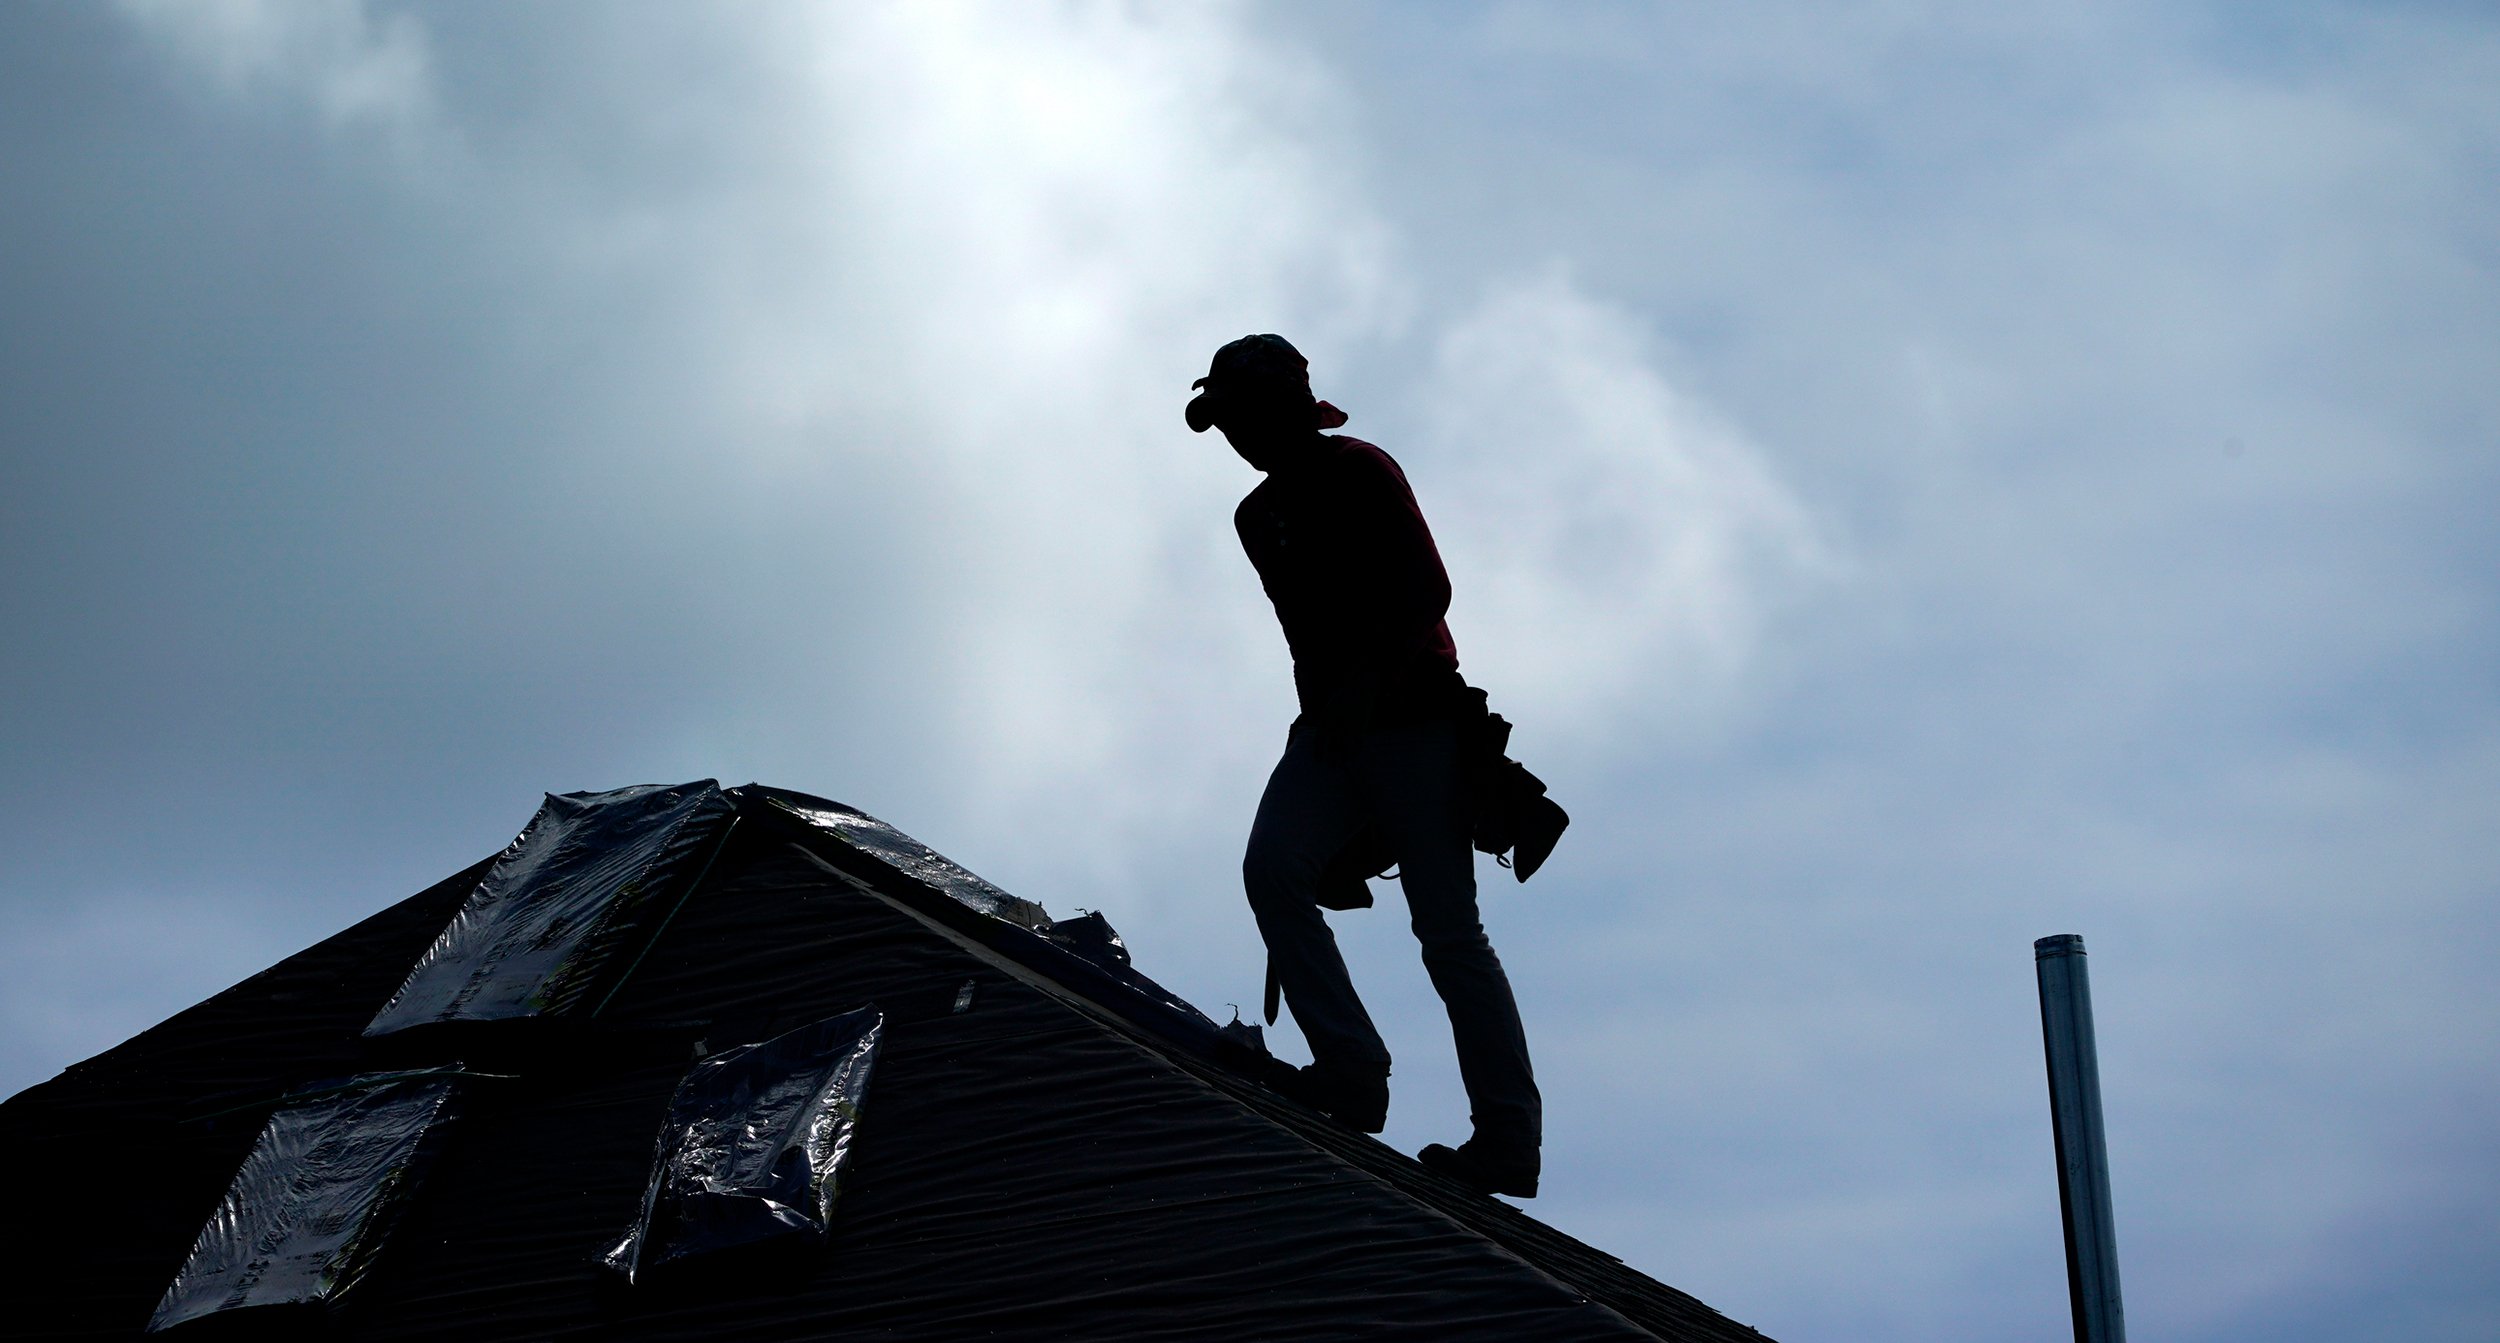 A roofer works on a new home under construction Thursday, July 18, 2019, in Houston. A heat wave is expected to send temperatures soaring close to 100 degrees through the weekend across much of the country. The National Weather Service estimates that more than 100 heat records will fall on Saturday. Most will not be the scorching daily highs, but for lack of cooling at night, something called nighttime lows. Those lows will be record highs. (AP Photo/David J. Phillip)